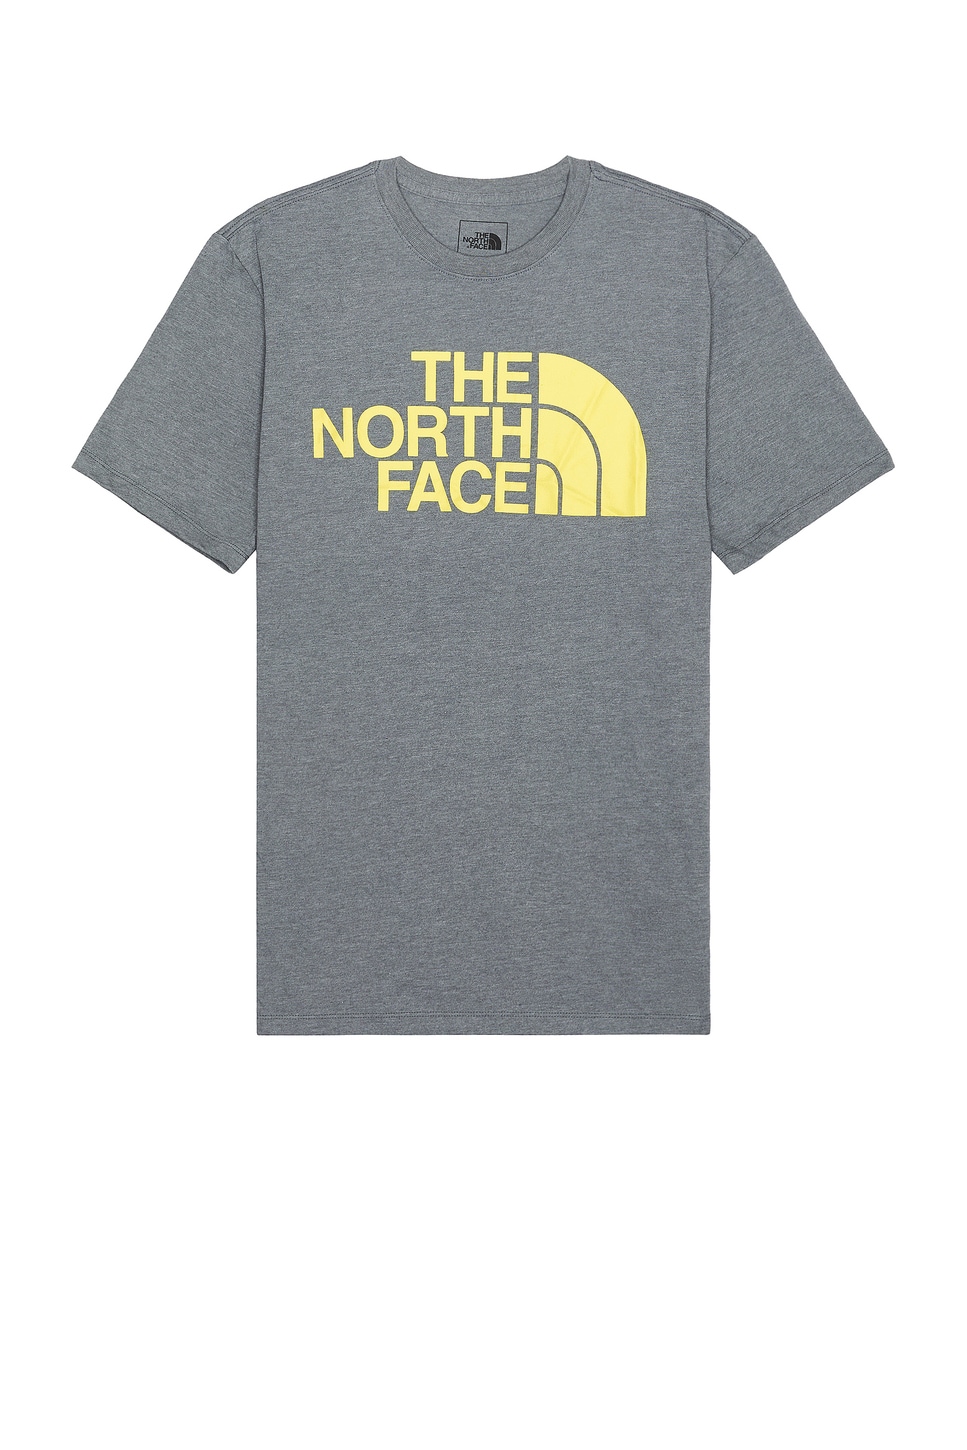 Image 1 of The North Face Short Sleeve Half Dome Tee in Tnf Medium Grey Heather